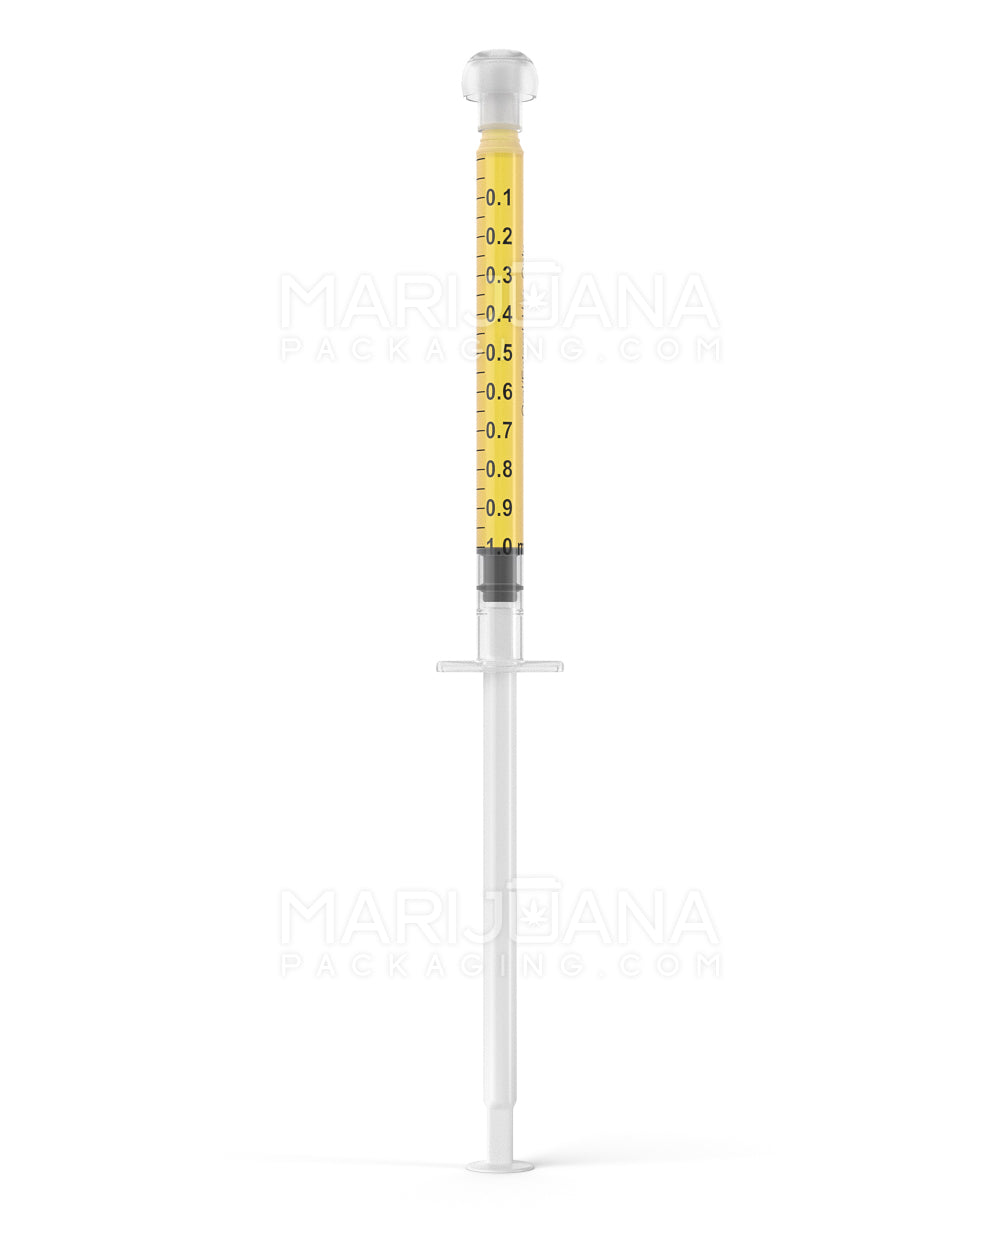 Plastic Oral Concentrate Syringes | 1mL - 0.1mL Increments | Sample - 2